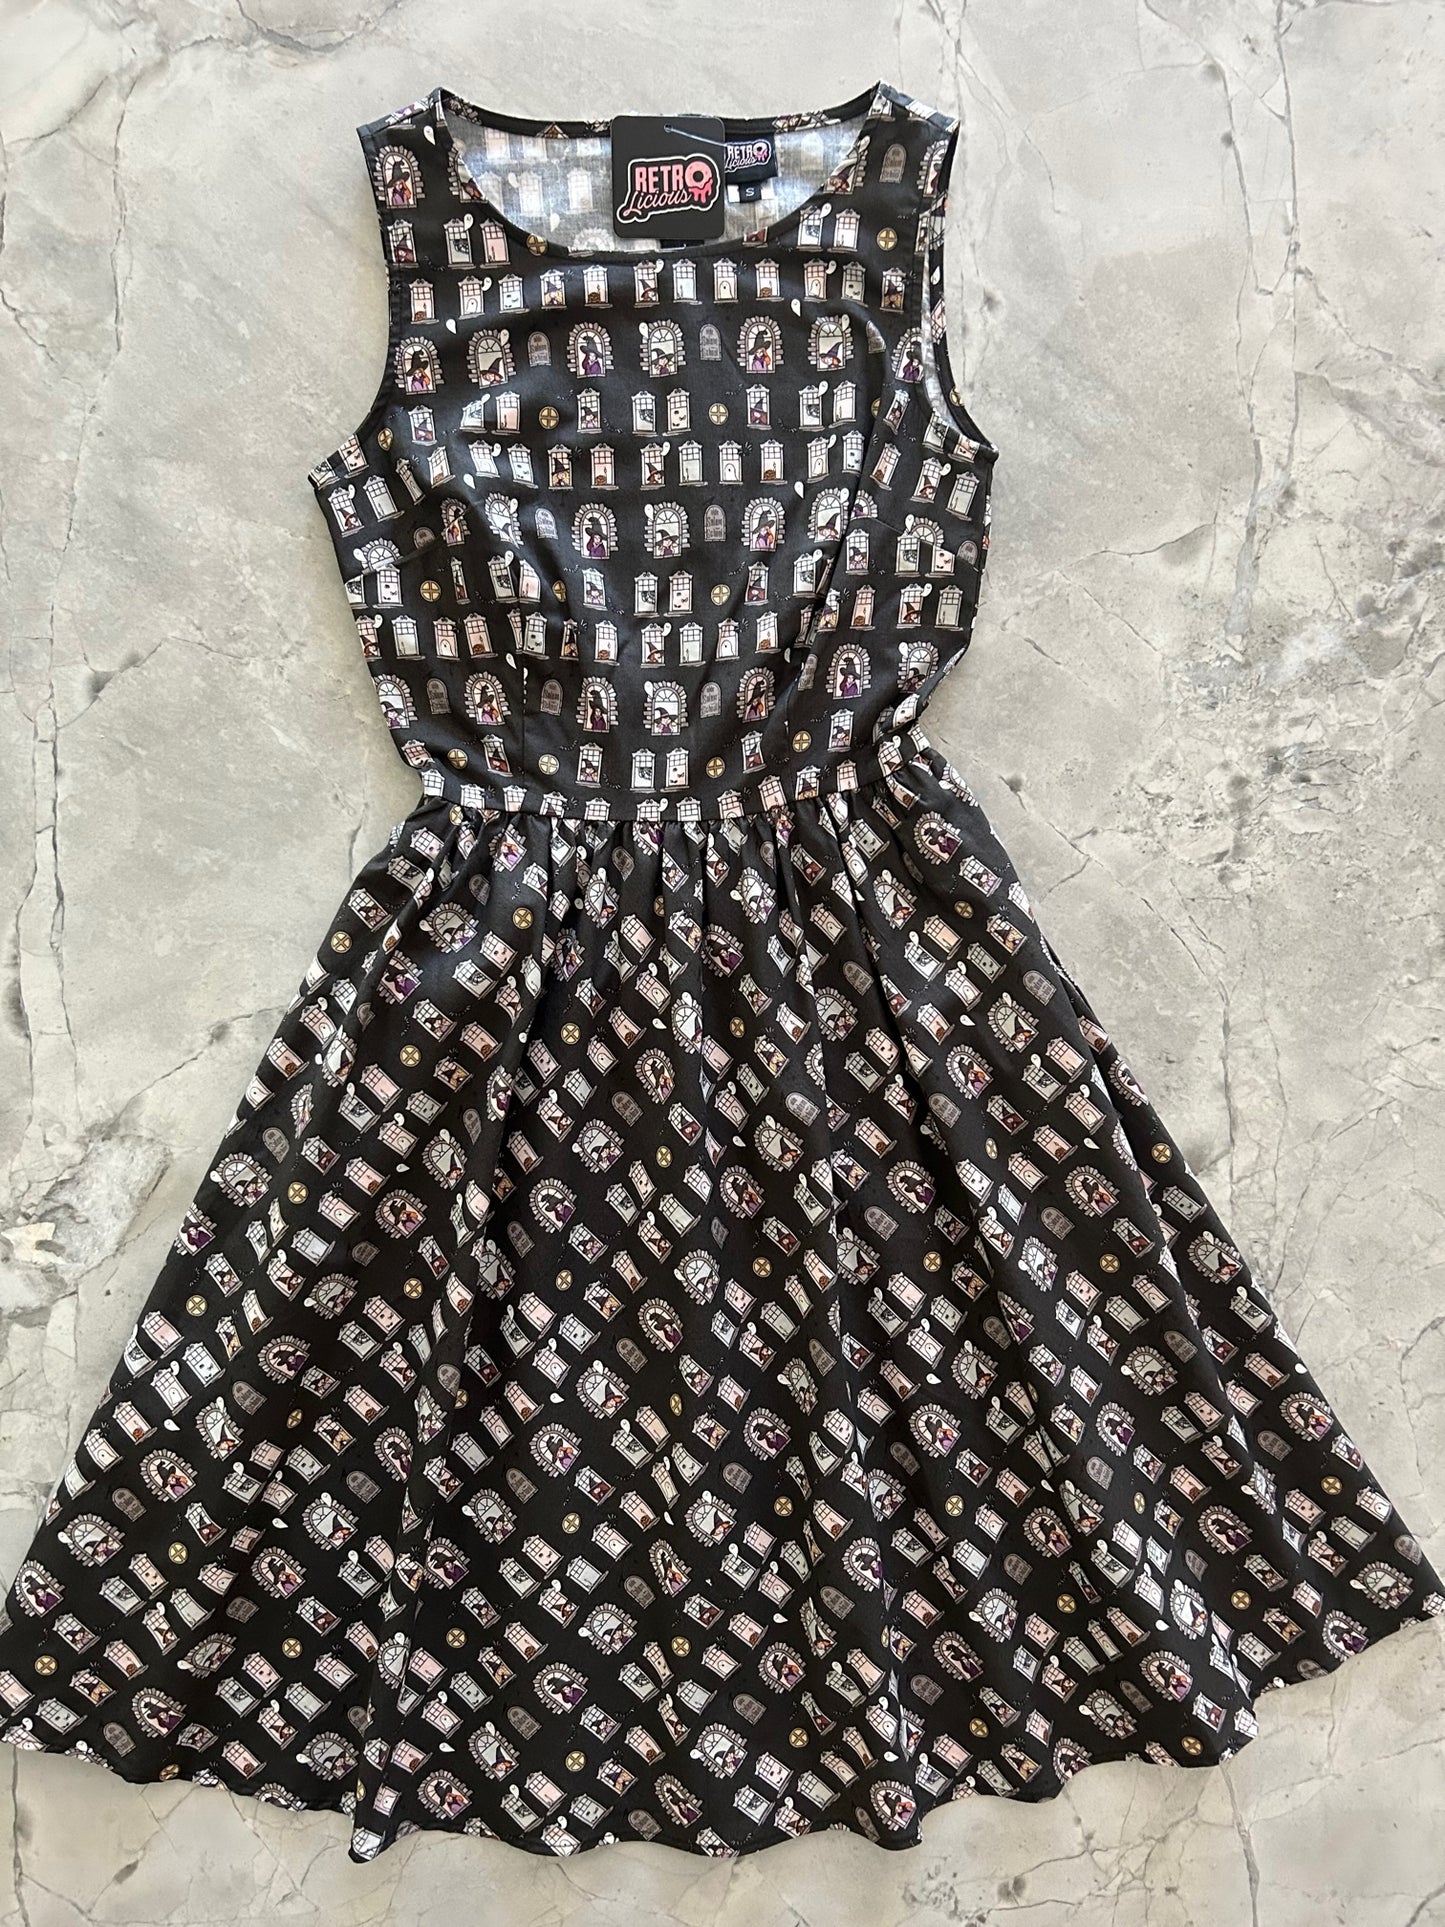 a flat lay image of the front of the Sale School vintage dress